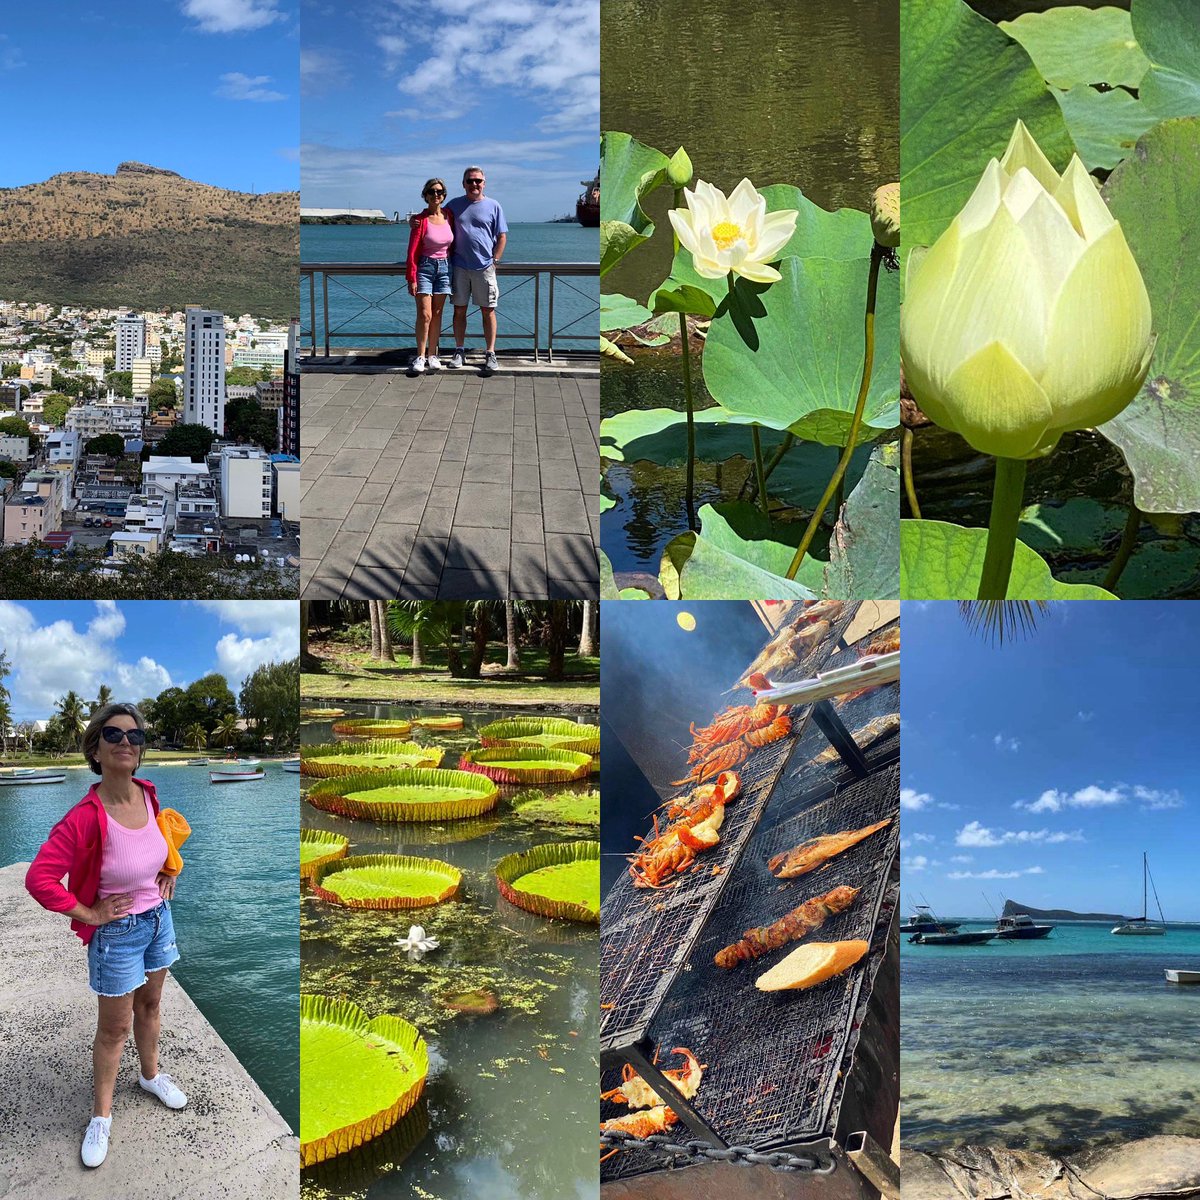 Mauritius for a week! #mauritius #holidays #nature #cocktails #travel